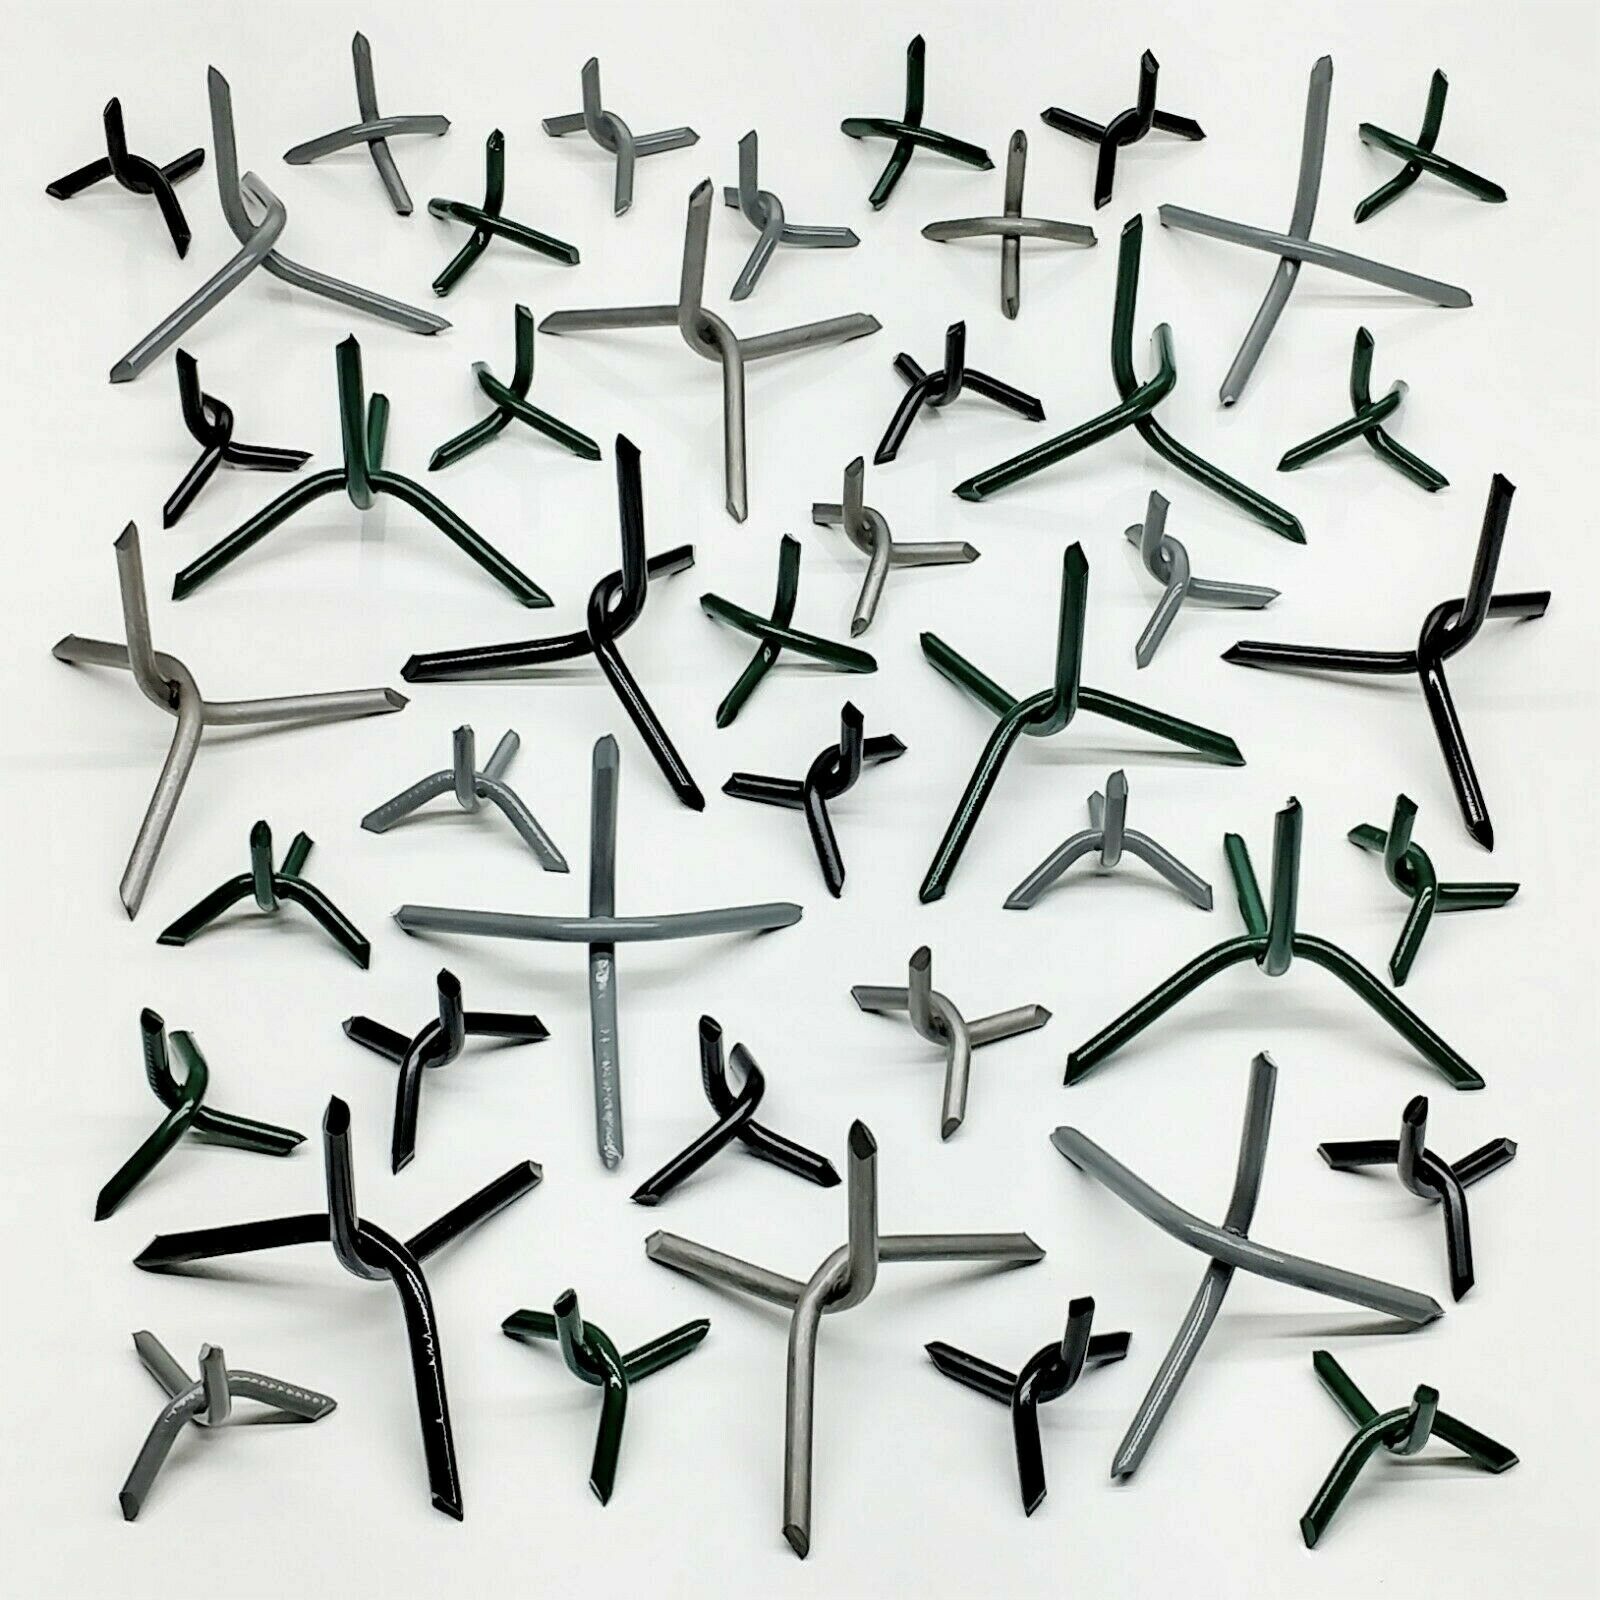 10 Large Caltrops - Road Tire Spikes Stars Immobilizers - 5 Colors - Heavy Steel